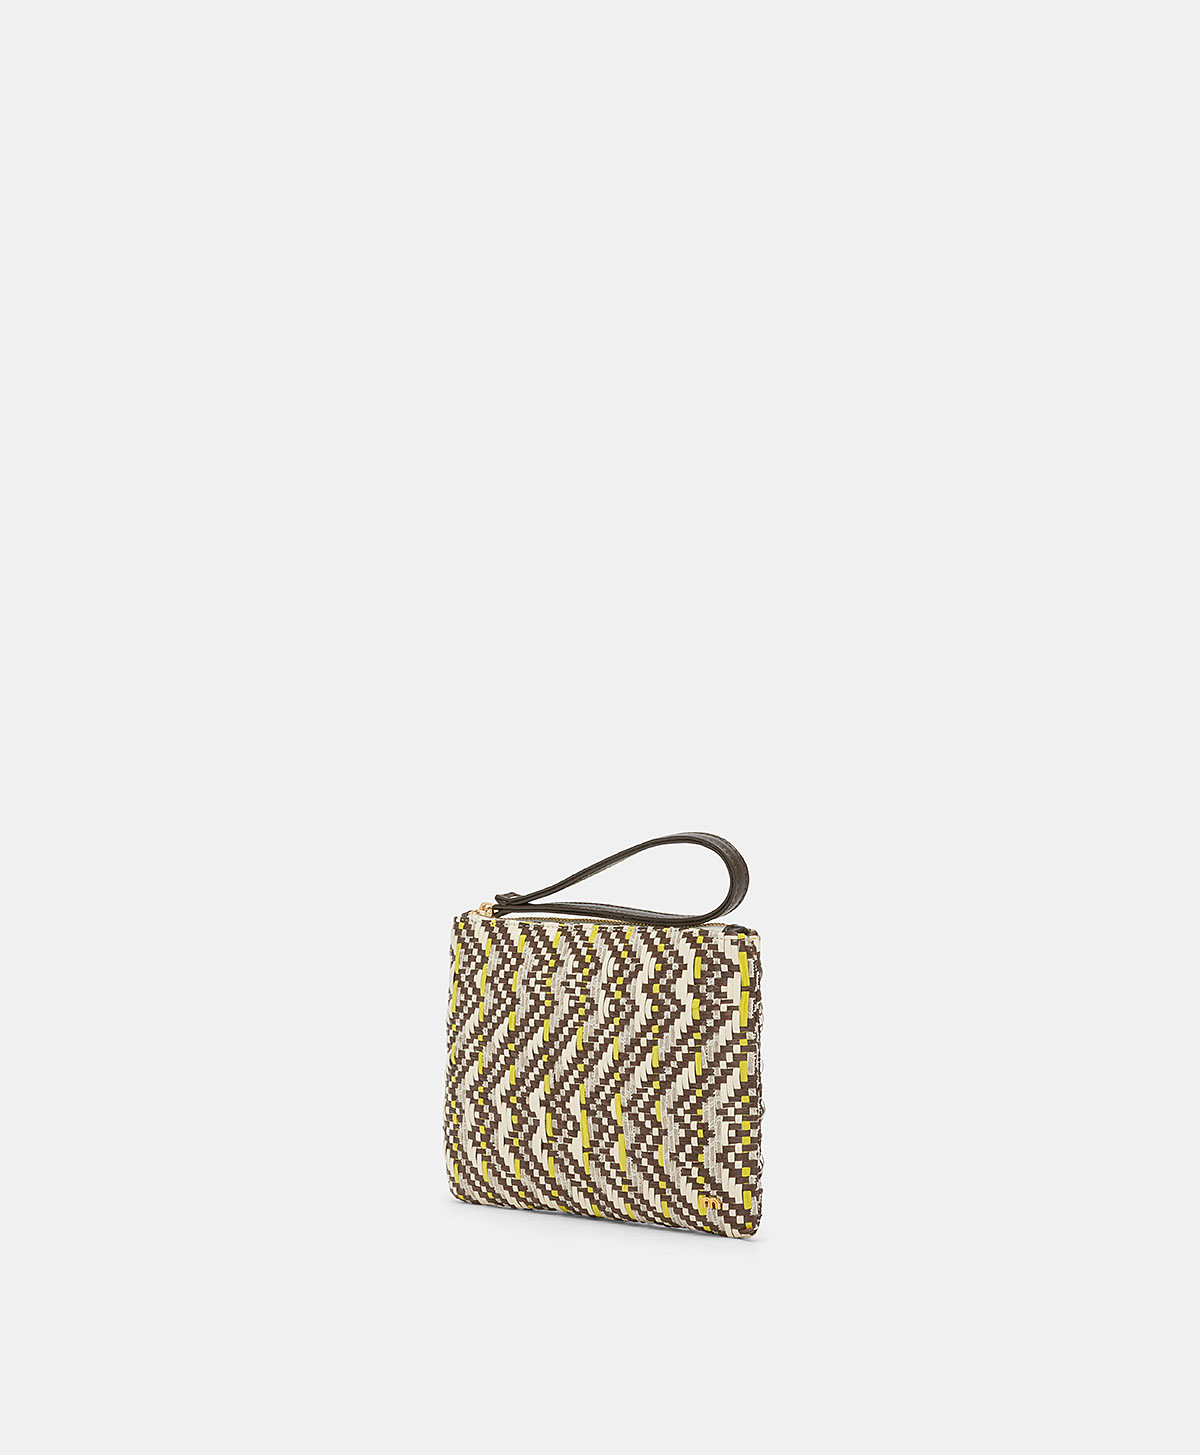 FRAGUA BAG WITH WOVEN - BROWN / MULTICOLOR - Momonì